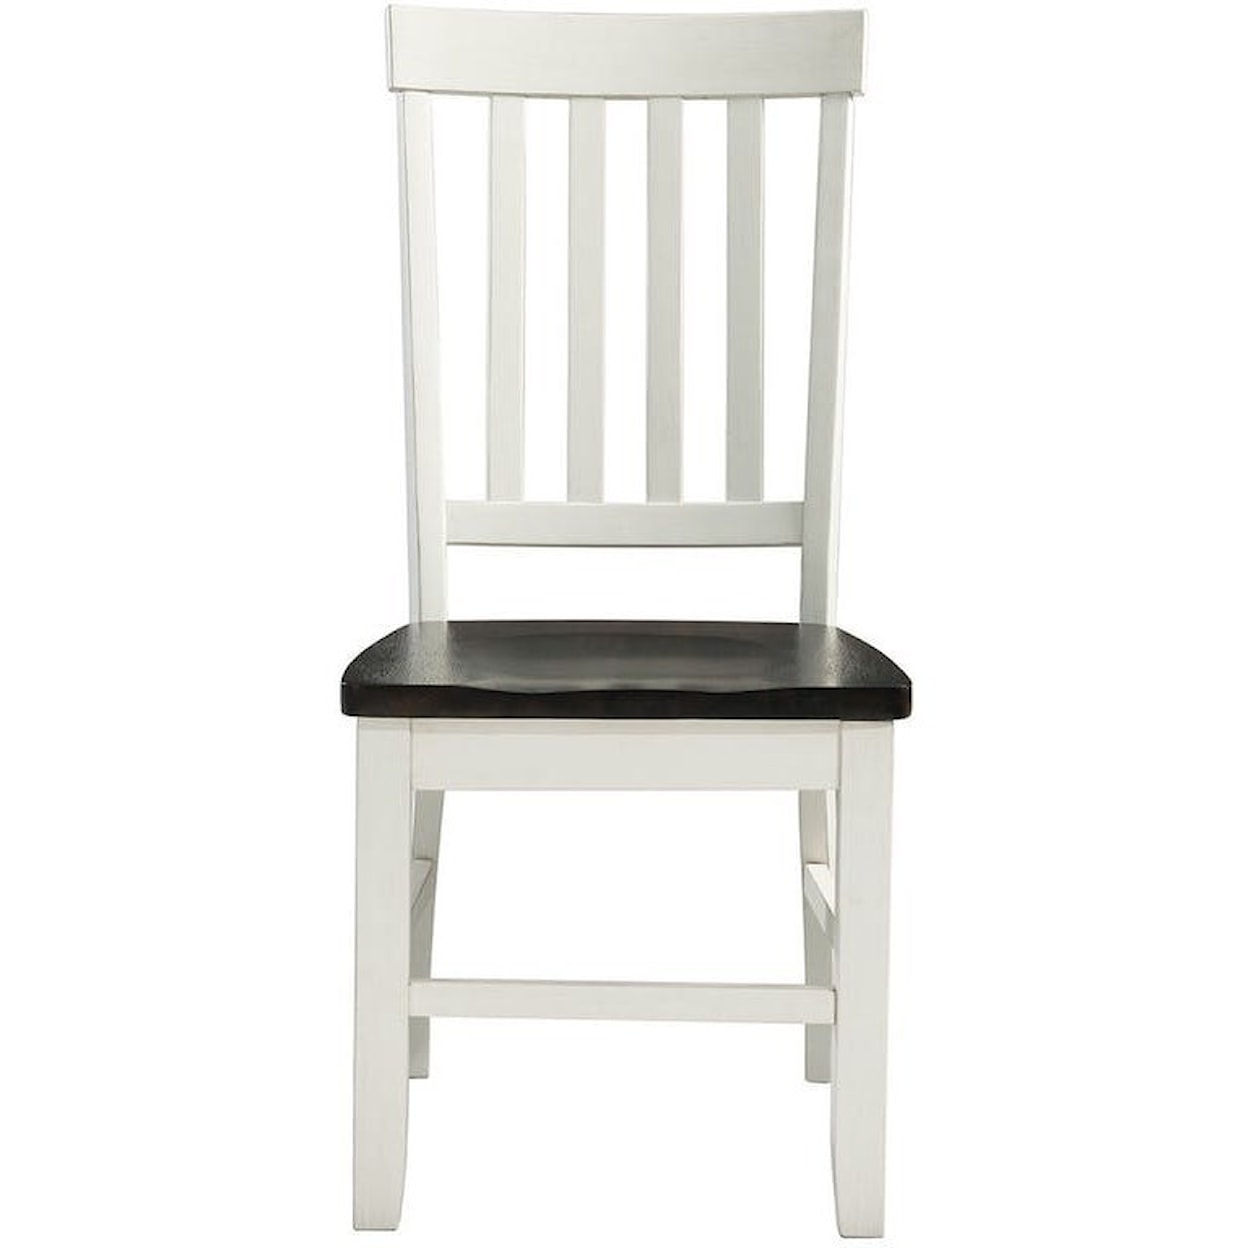 Elements Kayla Two-Tone Side Chair